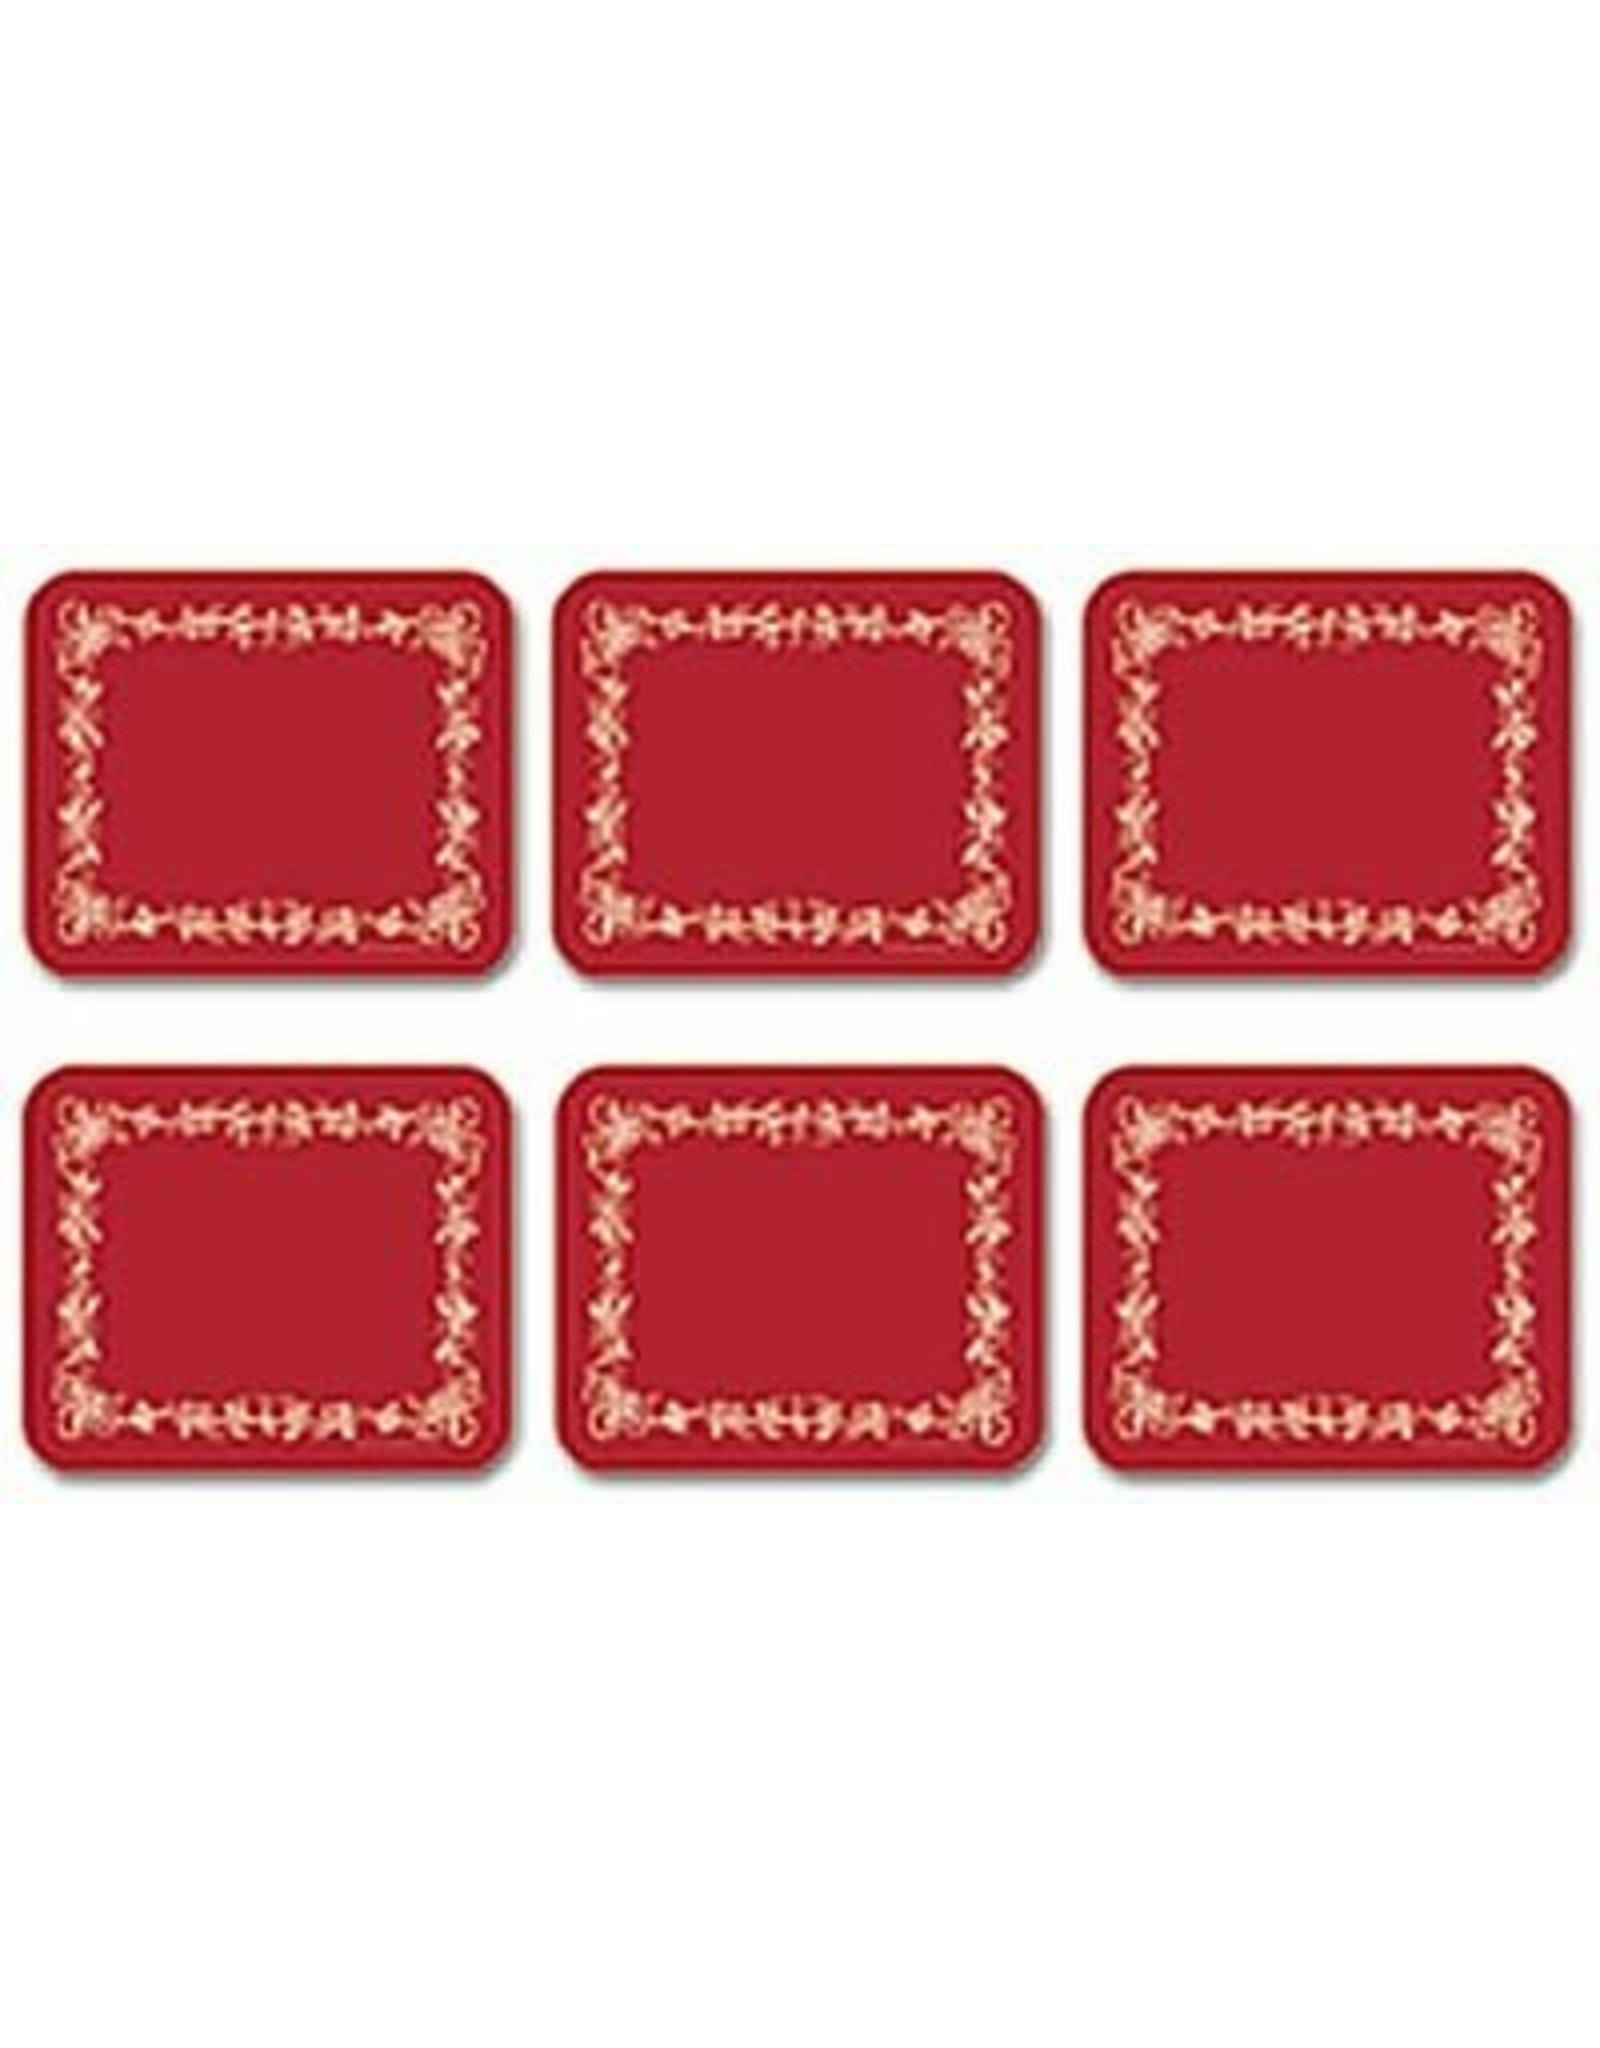 Jason Christmas Hardboard Placemats Red W White Holly Berry Set of 4